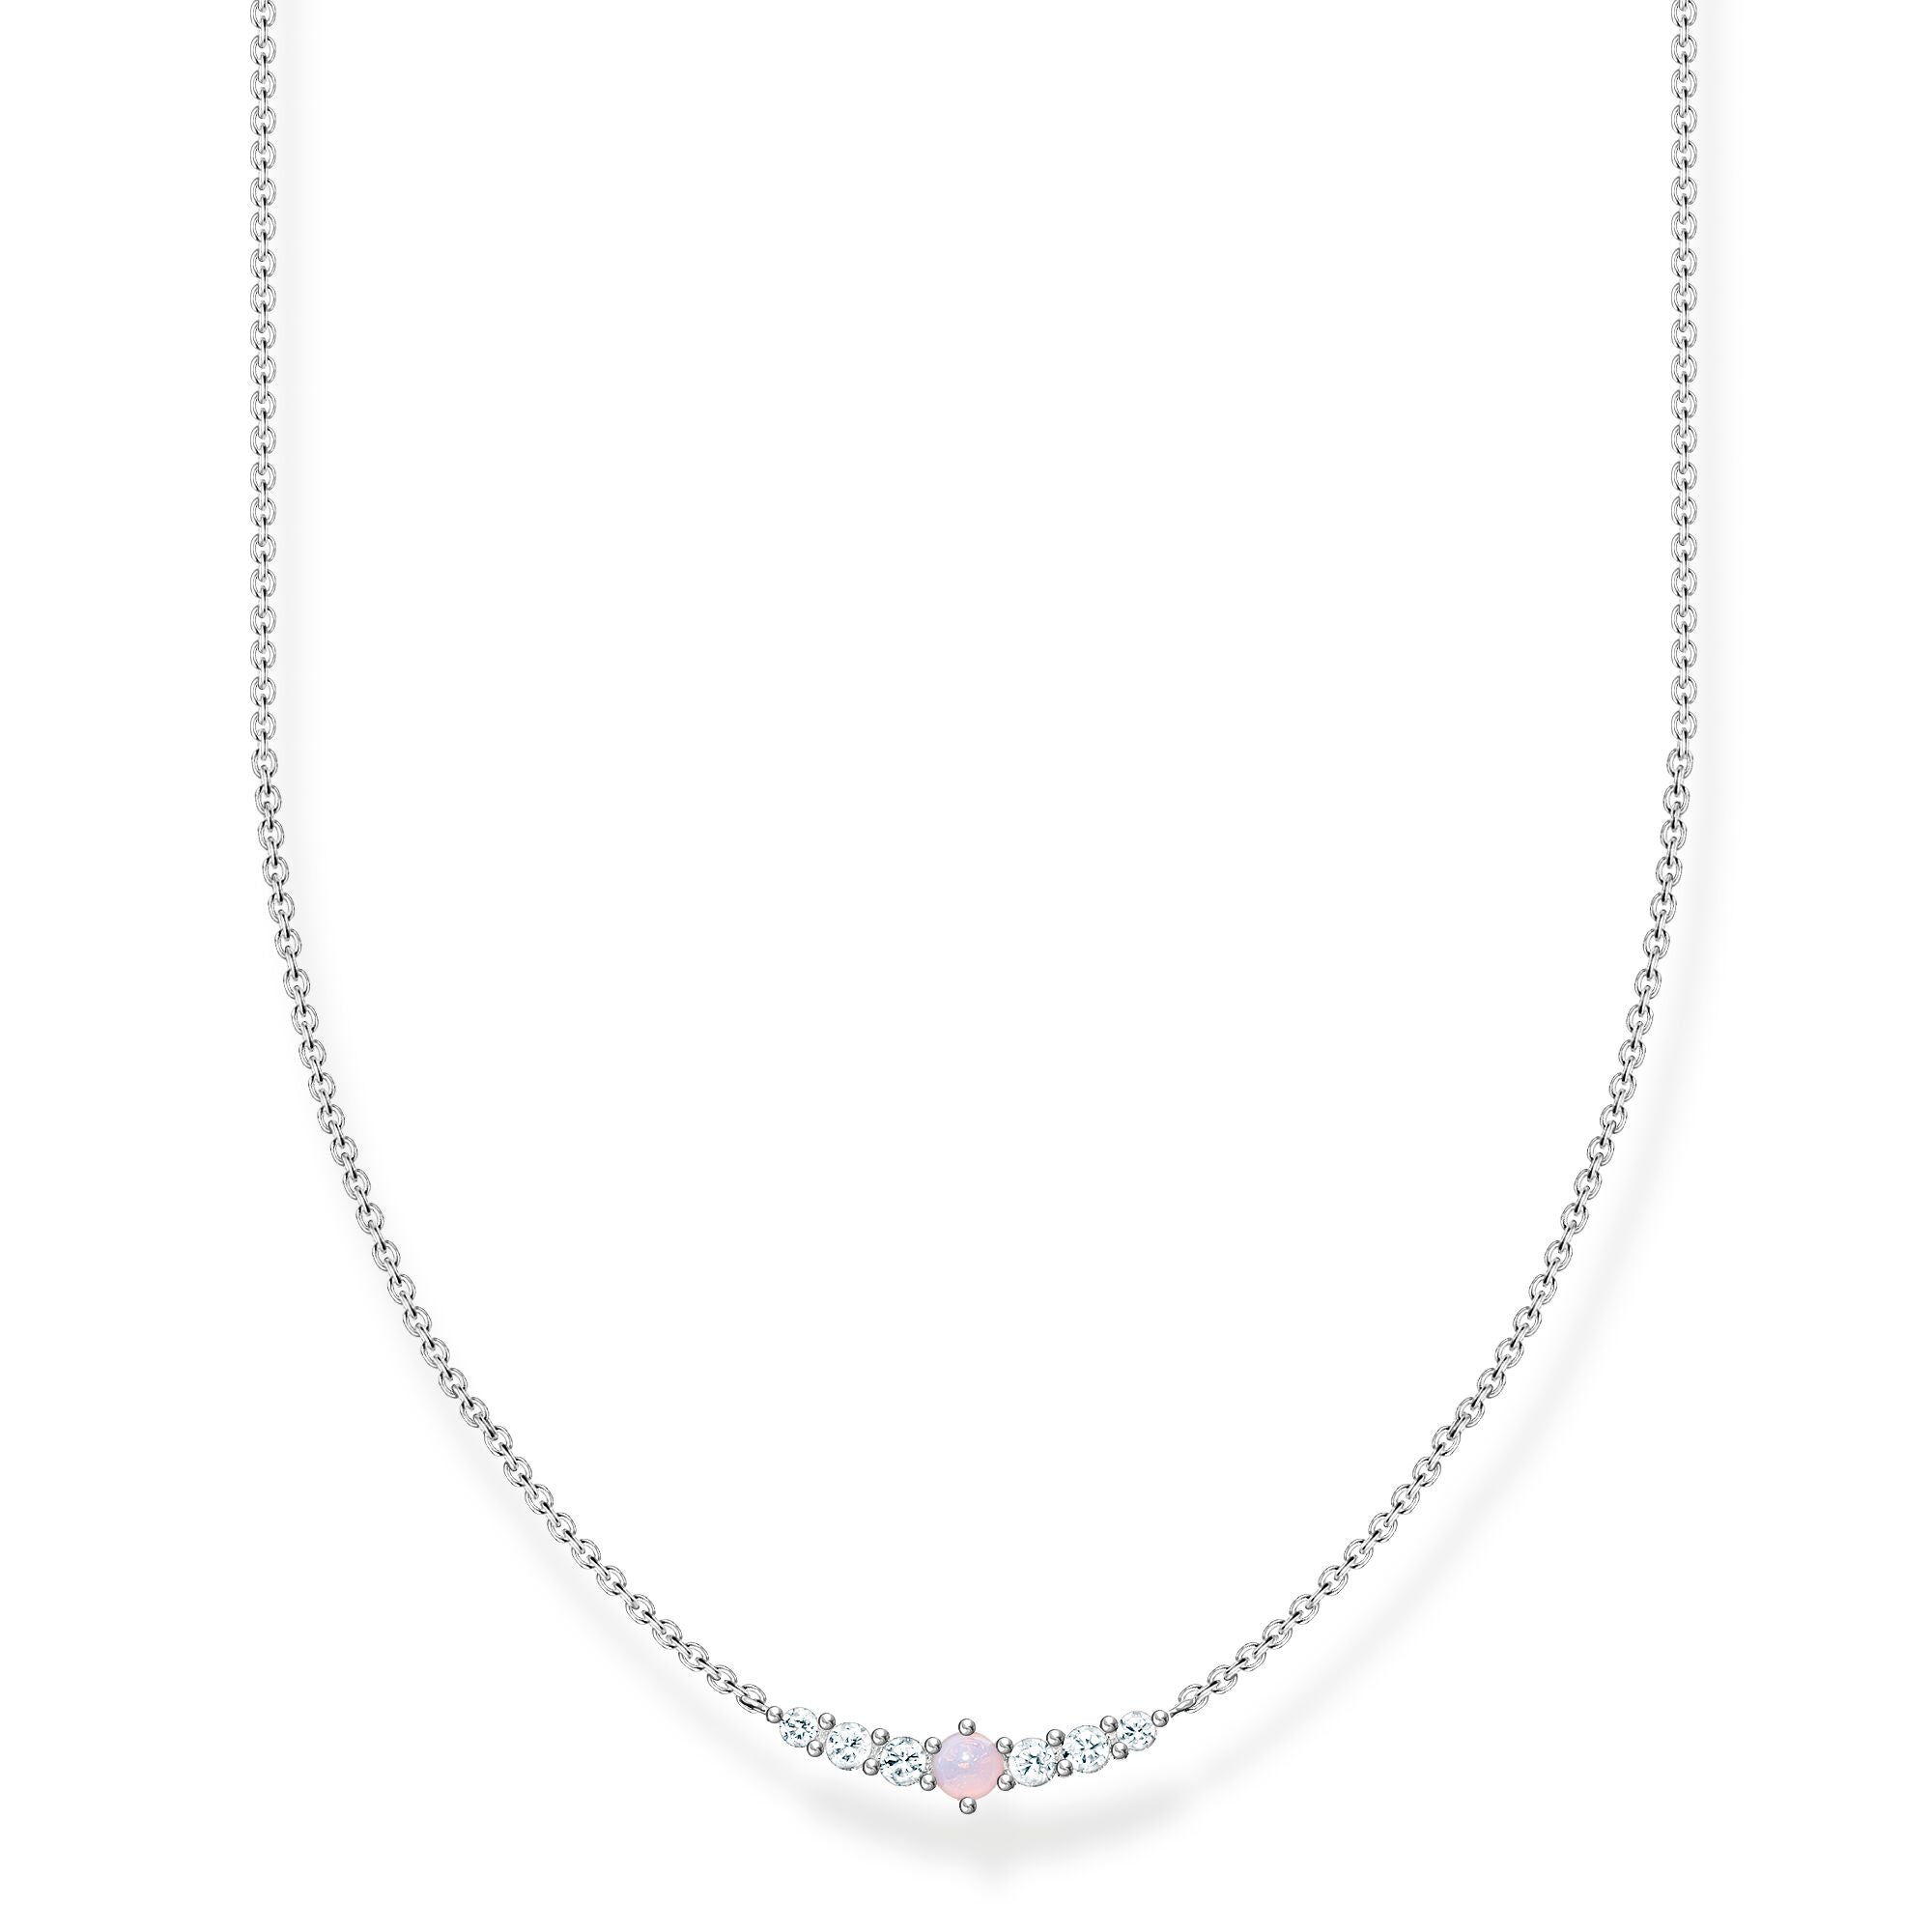 Necklace With White And Rose Opal Stones - Silver